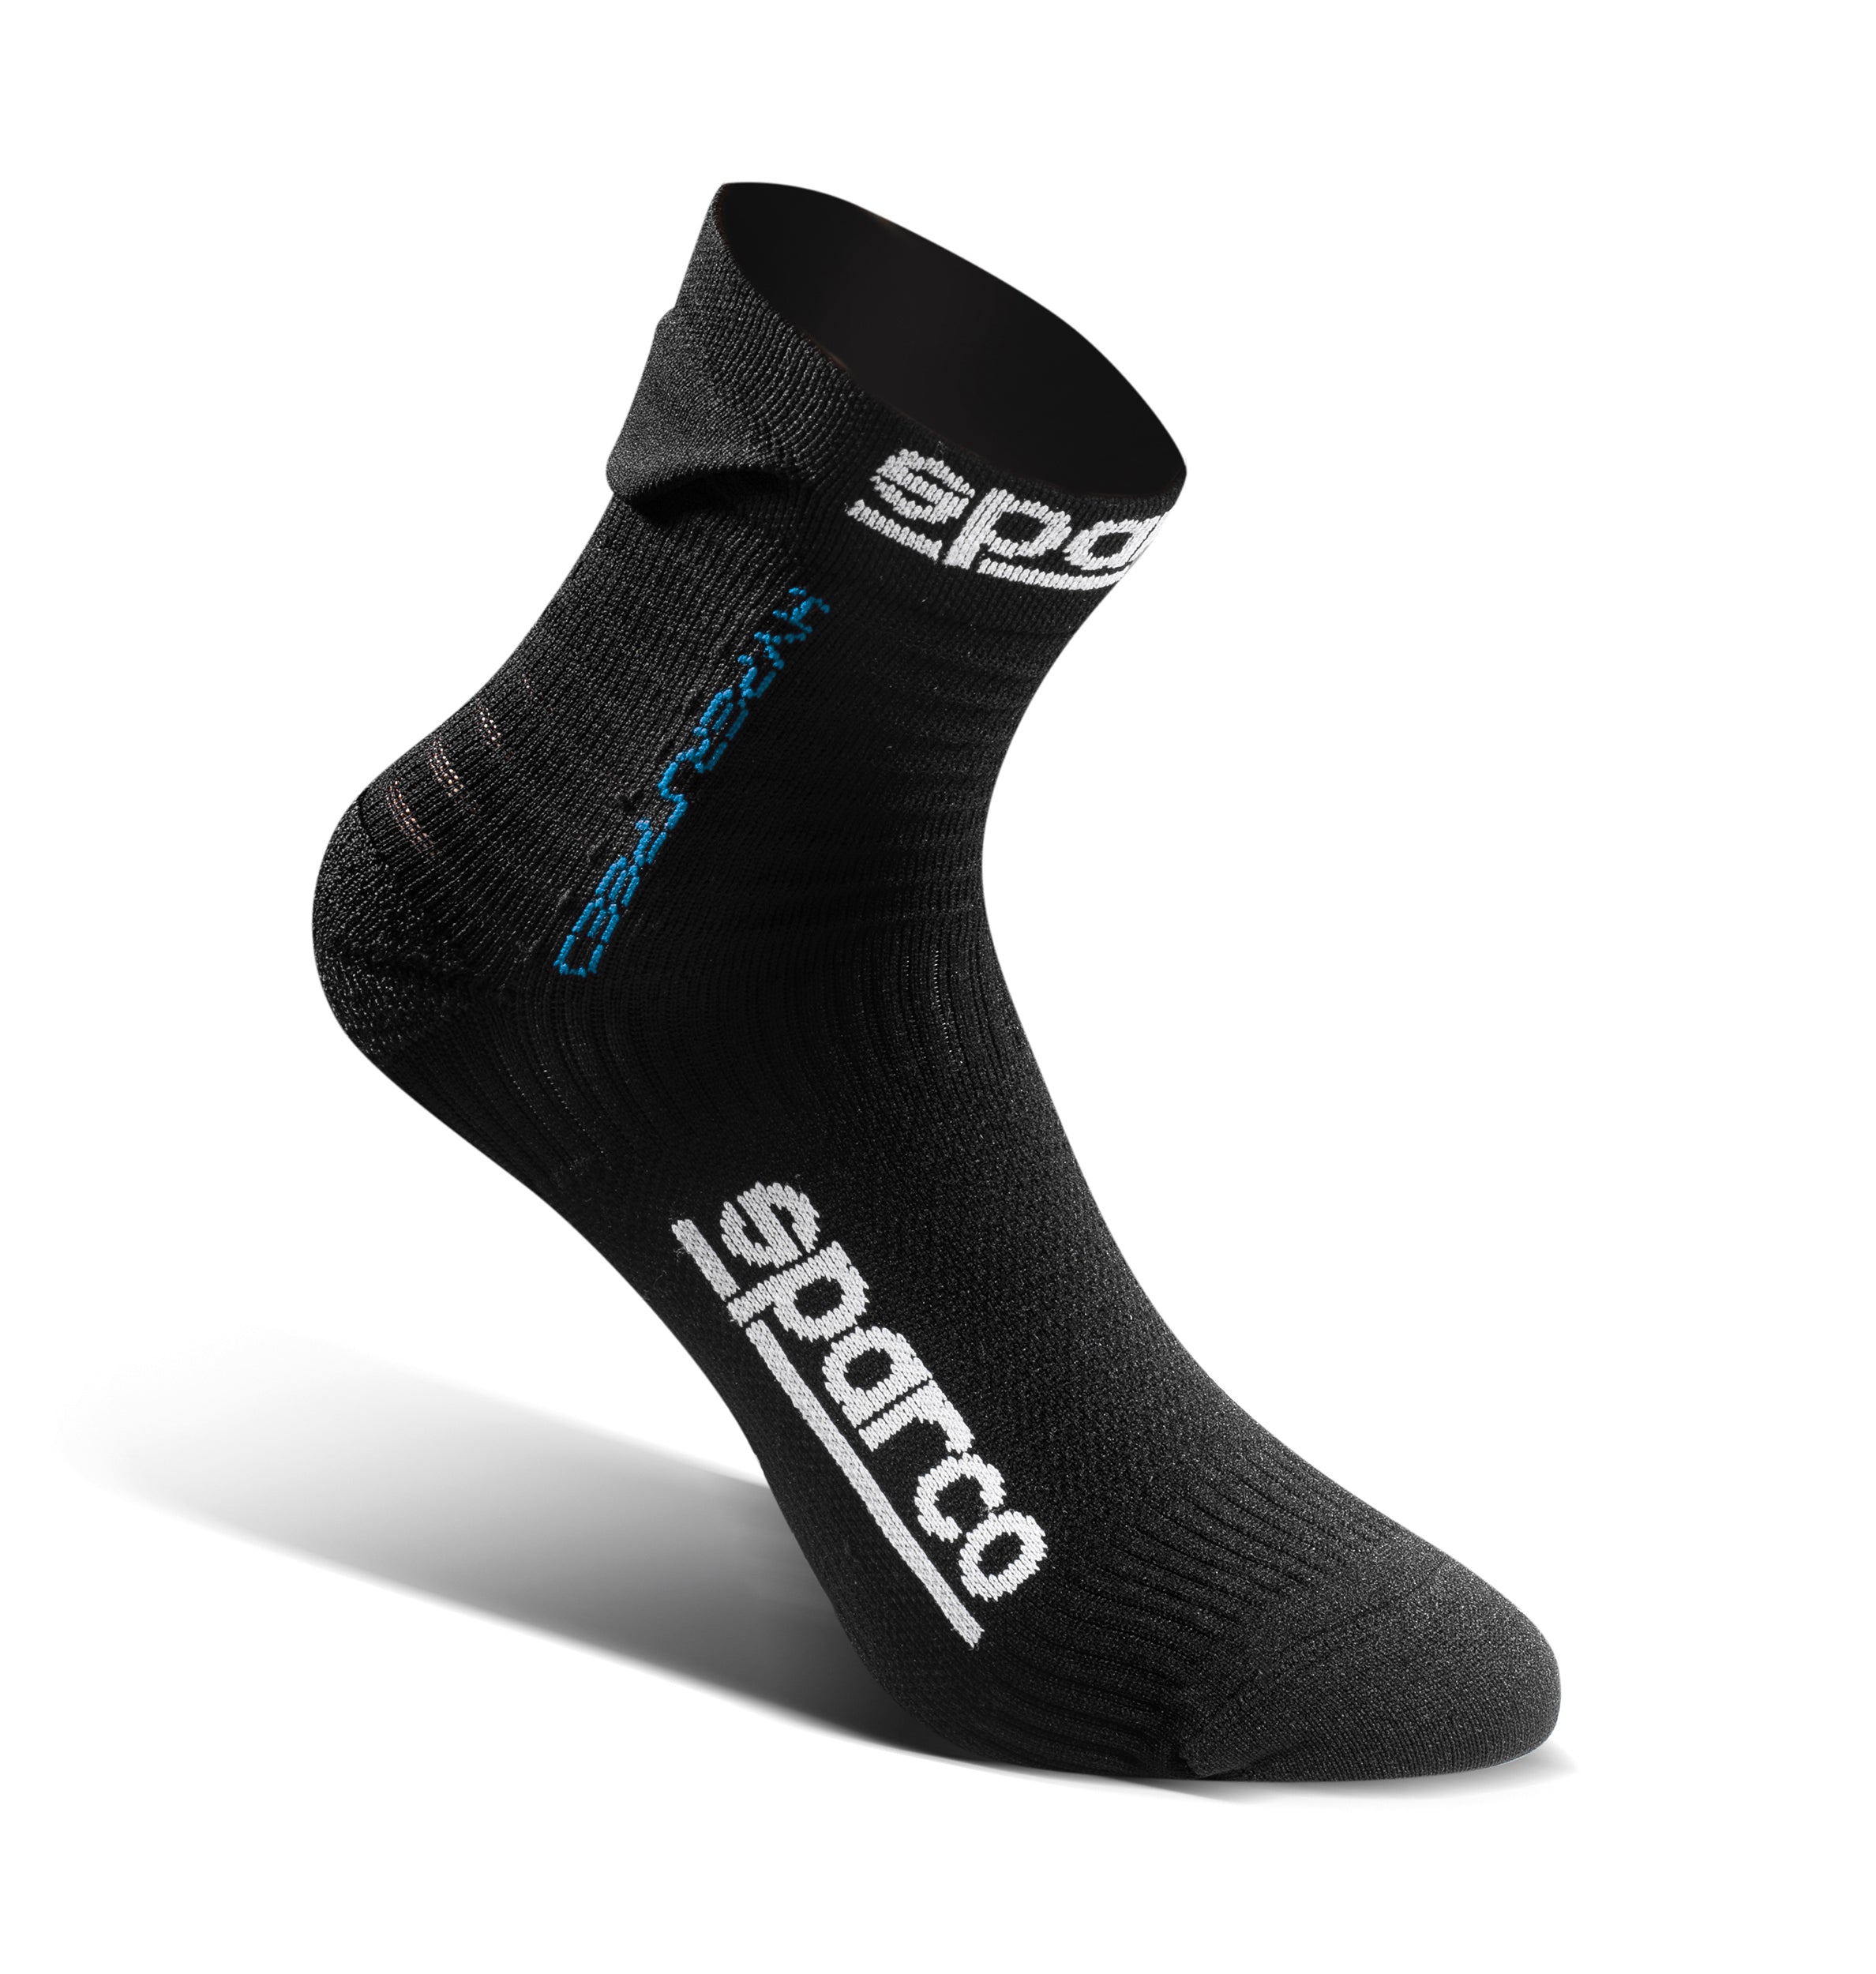 SPARCO 01290NRAZ4041 Driving socks HYPERSPEED, black/blue, size 40/41 Photo-0 